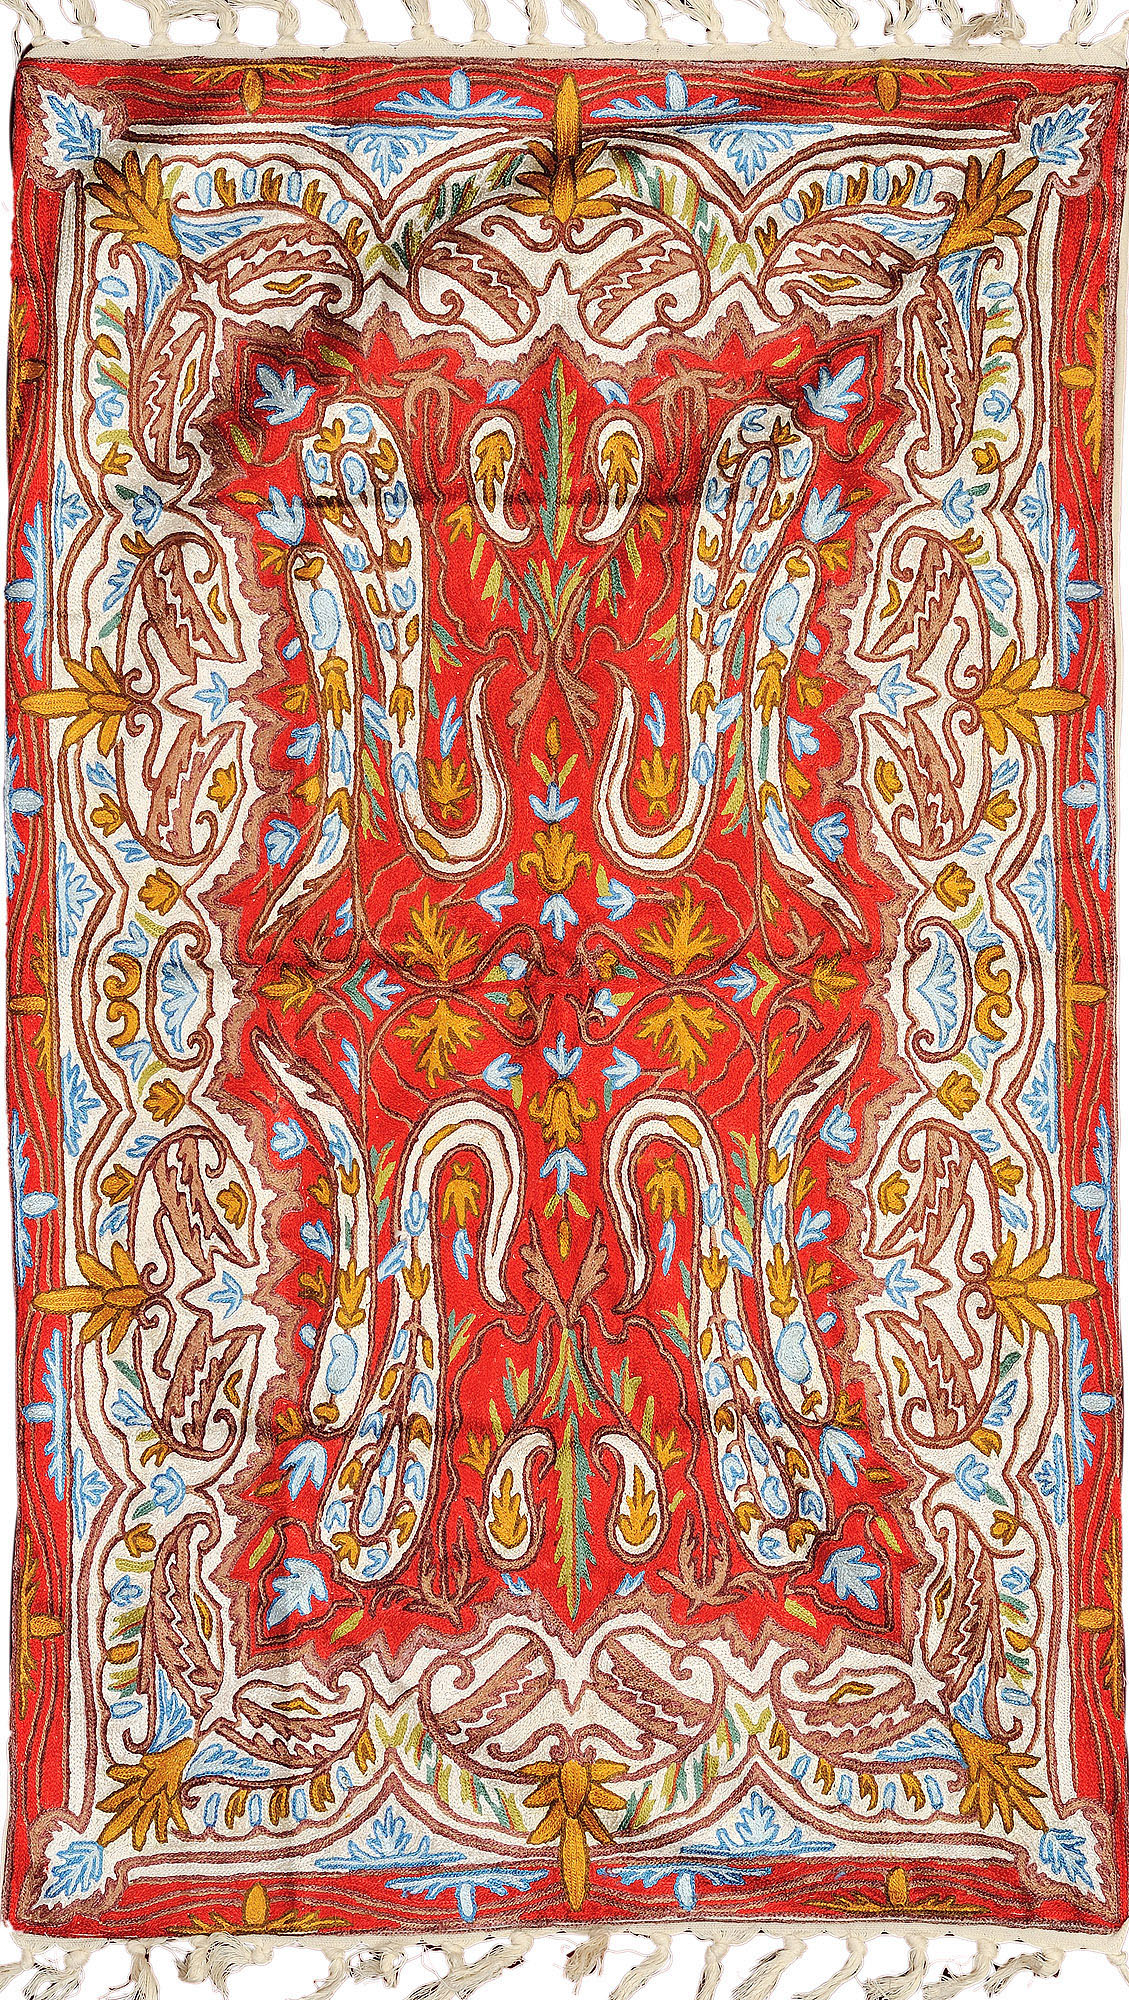 Coral-Reef Handloom Carpet from Kashmir with Knotted Flowers